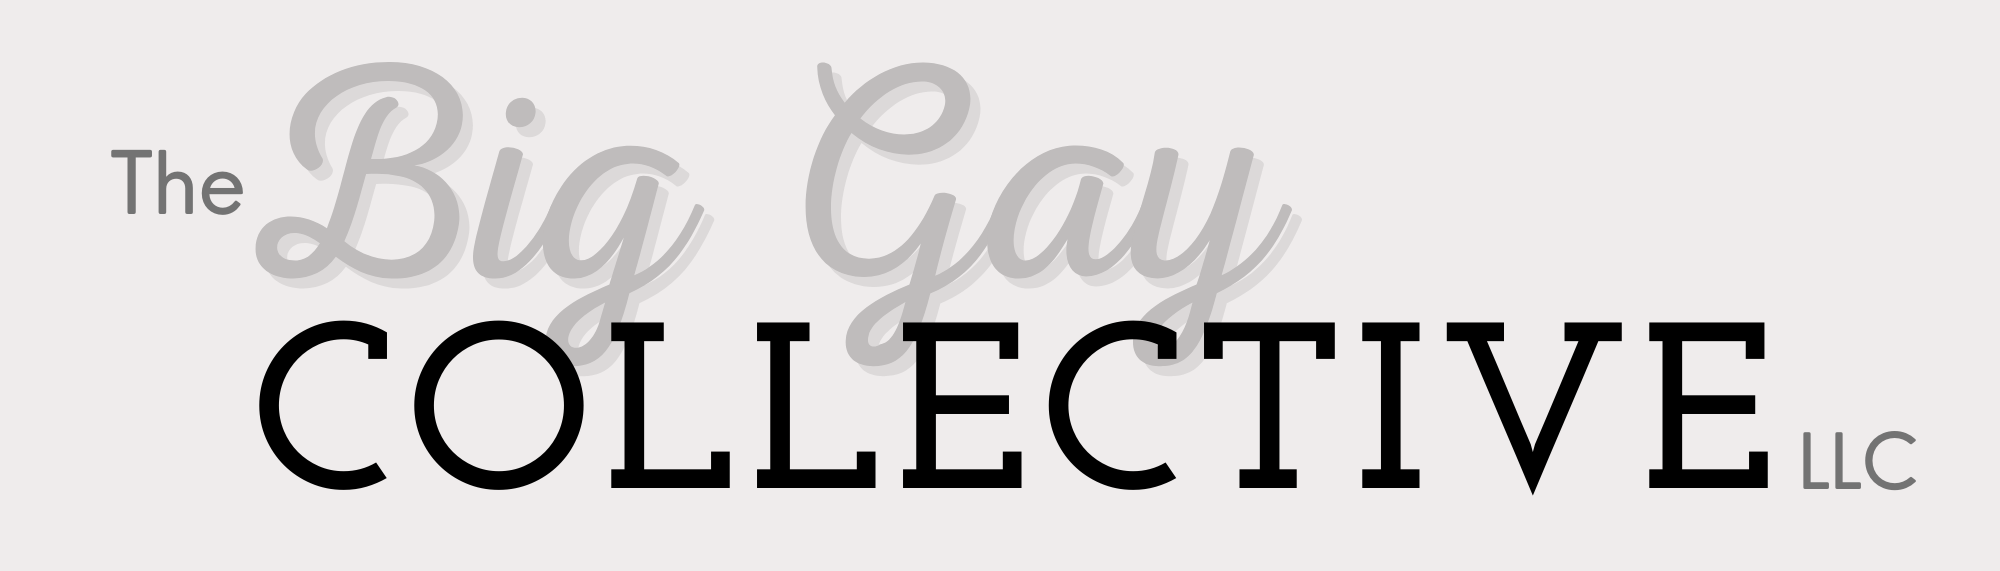 The Big Gay Collective